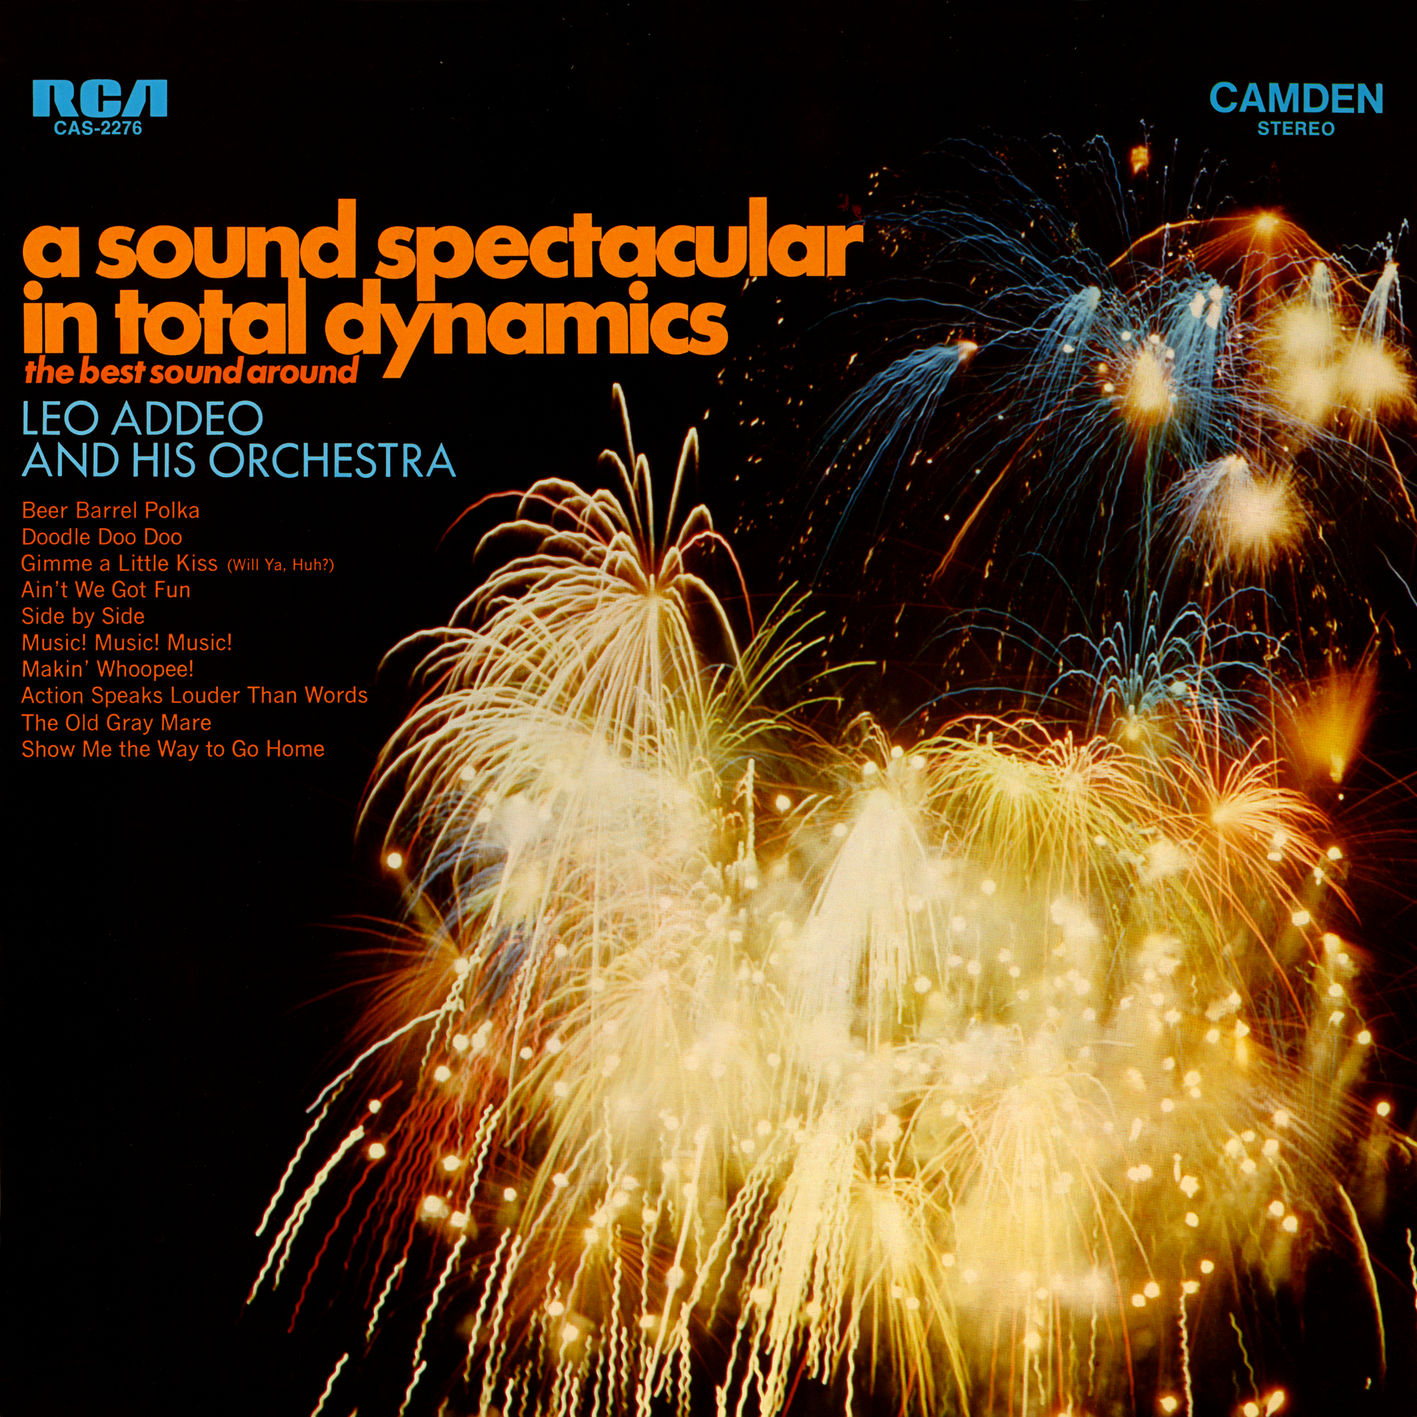 Leo Addeo And His Orchestra – A Sound Spectacular In Total Dynamics (1968/2018) [FLAC 24bit/192kHz]